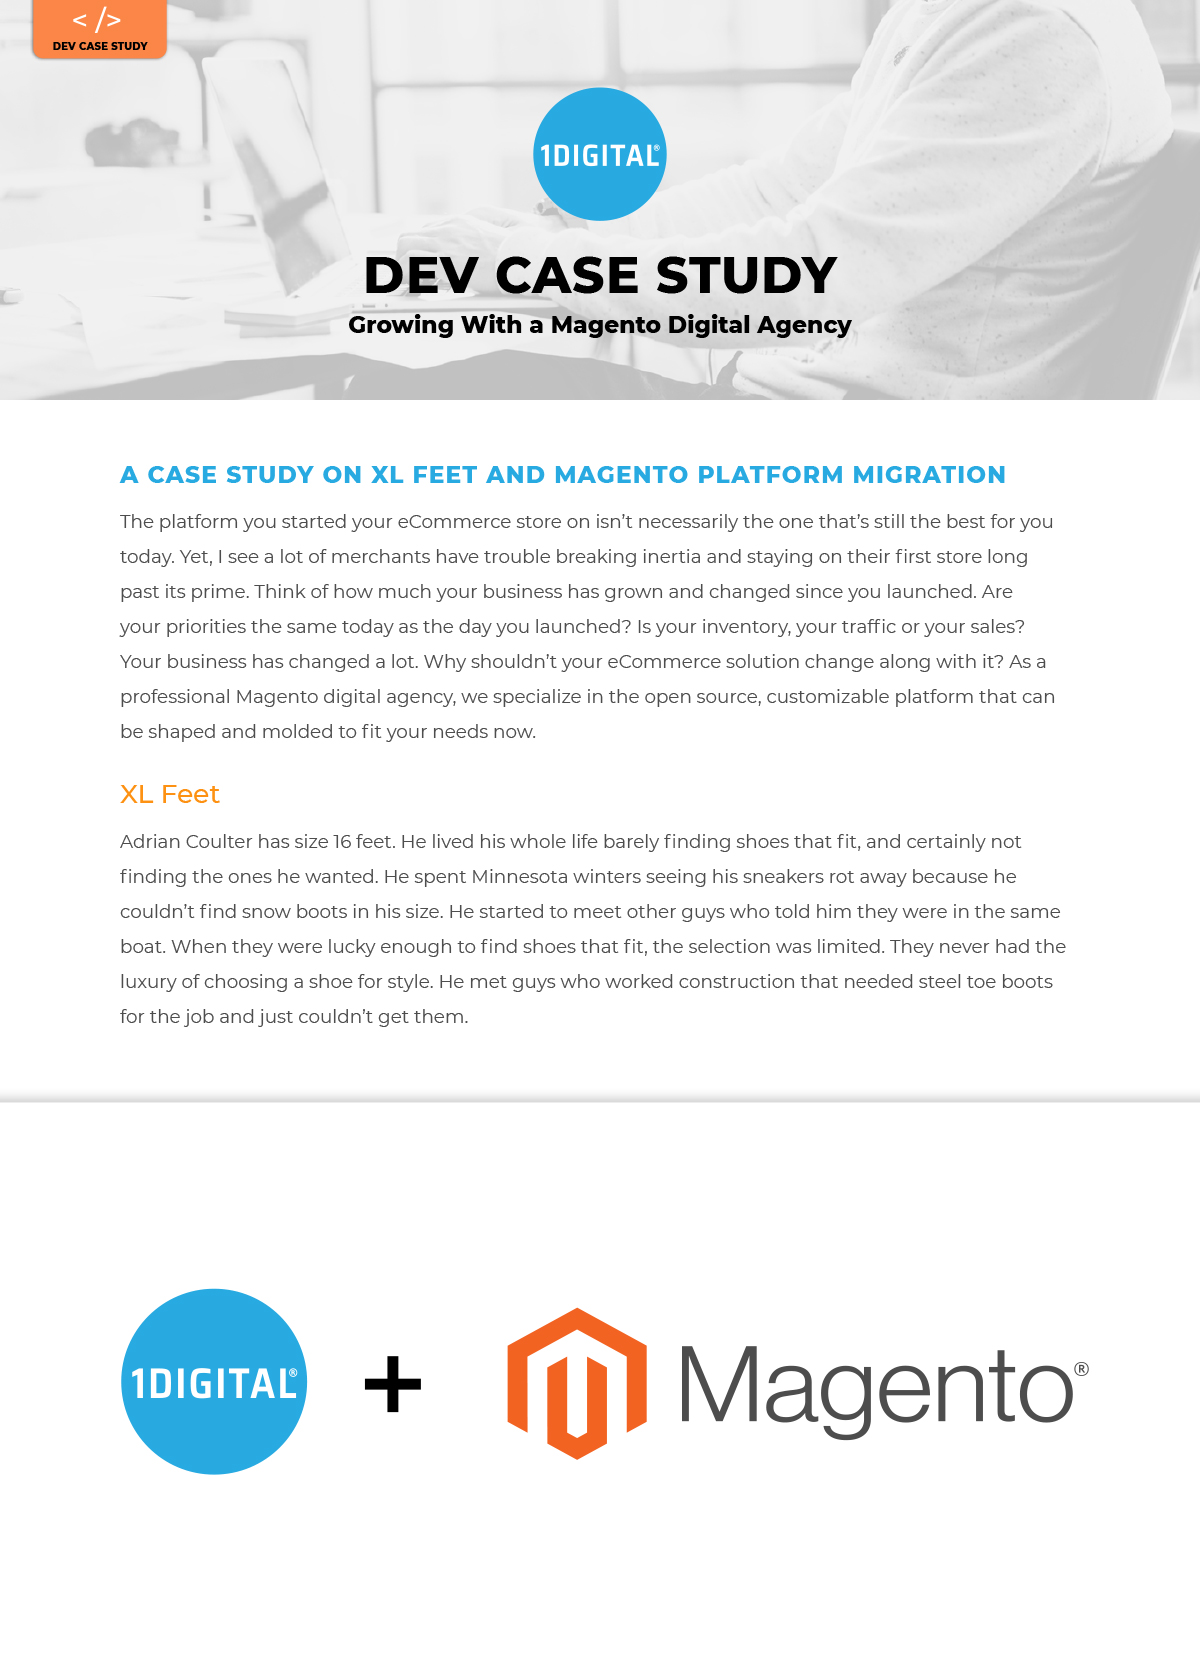 Growing with a Magento Digital Agency